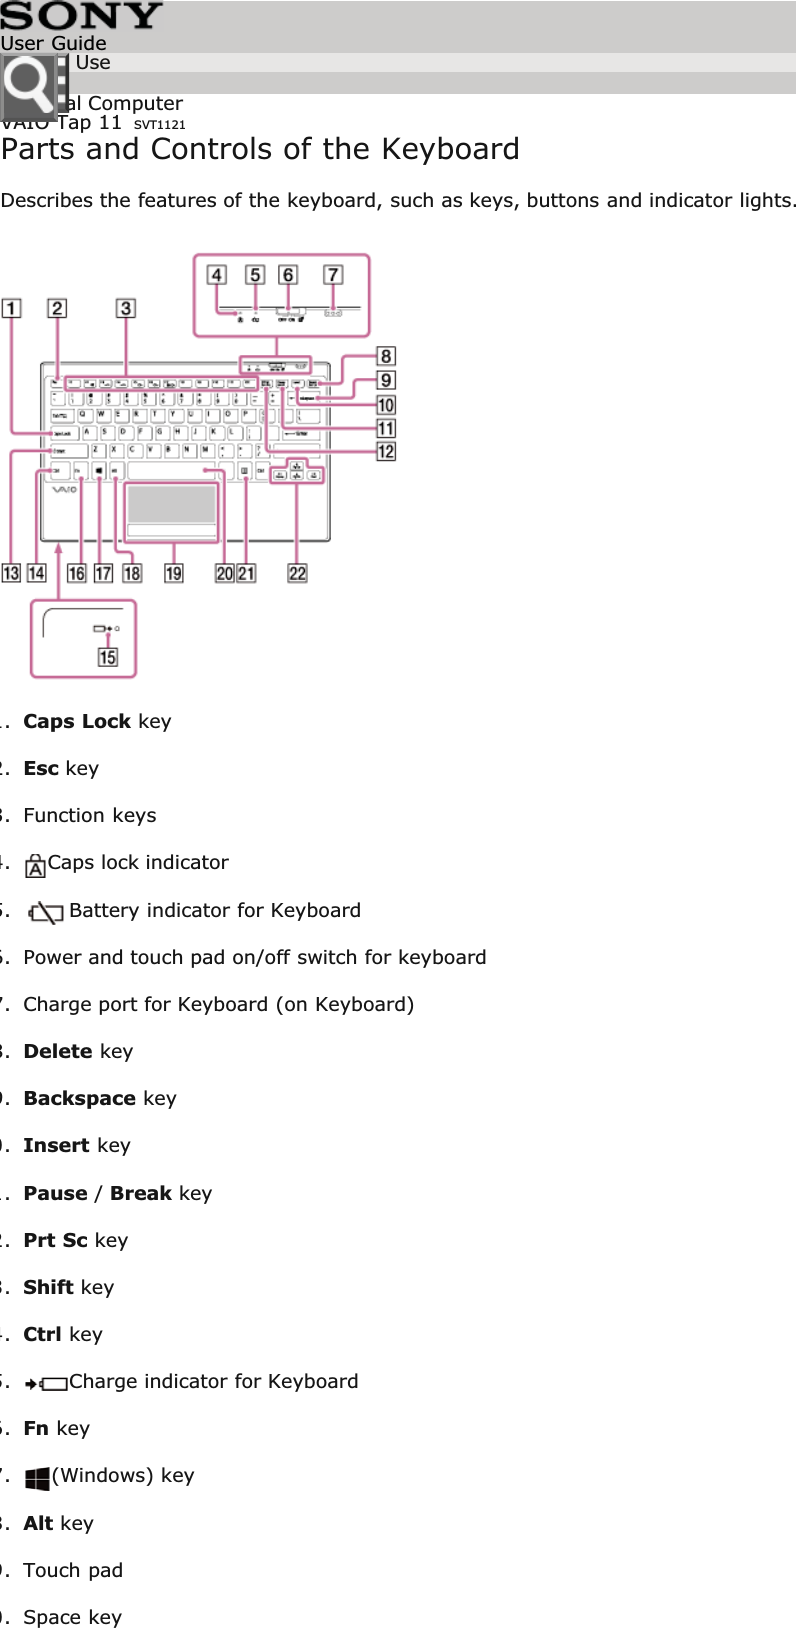 Personal ComputerVAIO Tap 11 SVT1121Parts and Controls of the KeyboardDescribes the features of the keyboard, such as keys, buttons and indicator lights.1.Caps Lock key2.Esc key3. Function keys4.Caps lock indicator5.Battery indicator for Keyboard6. Power and touch pad on/off switch for keyboard7. Charge port for Keyboard (on Keyboard)8.Delete key9.Backspace key0.Insert key1.Pause / Break key2.Prt Sc key3.Shift key4.Ctrl key5.Charge indicator for Keyboard6.Fn key7.(Windows) key8.Alt key9. Touch pad0. Space keyUser GuideHow to Use